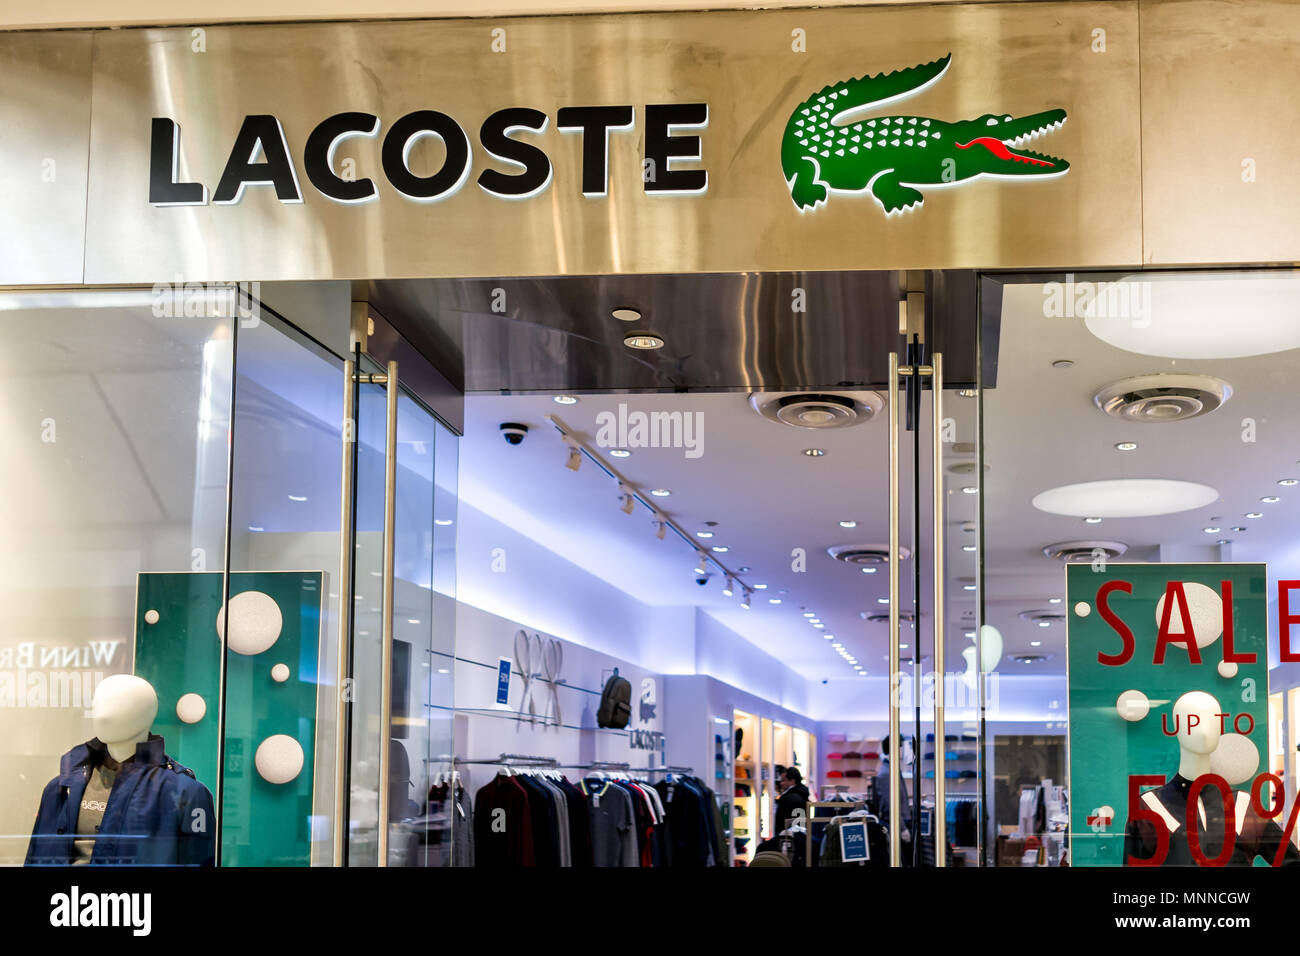 outlet mall lacoste